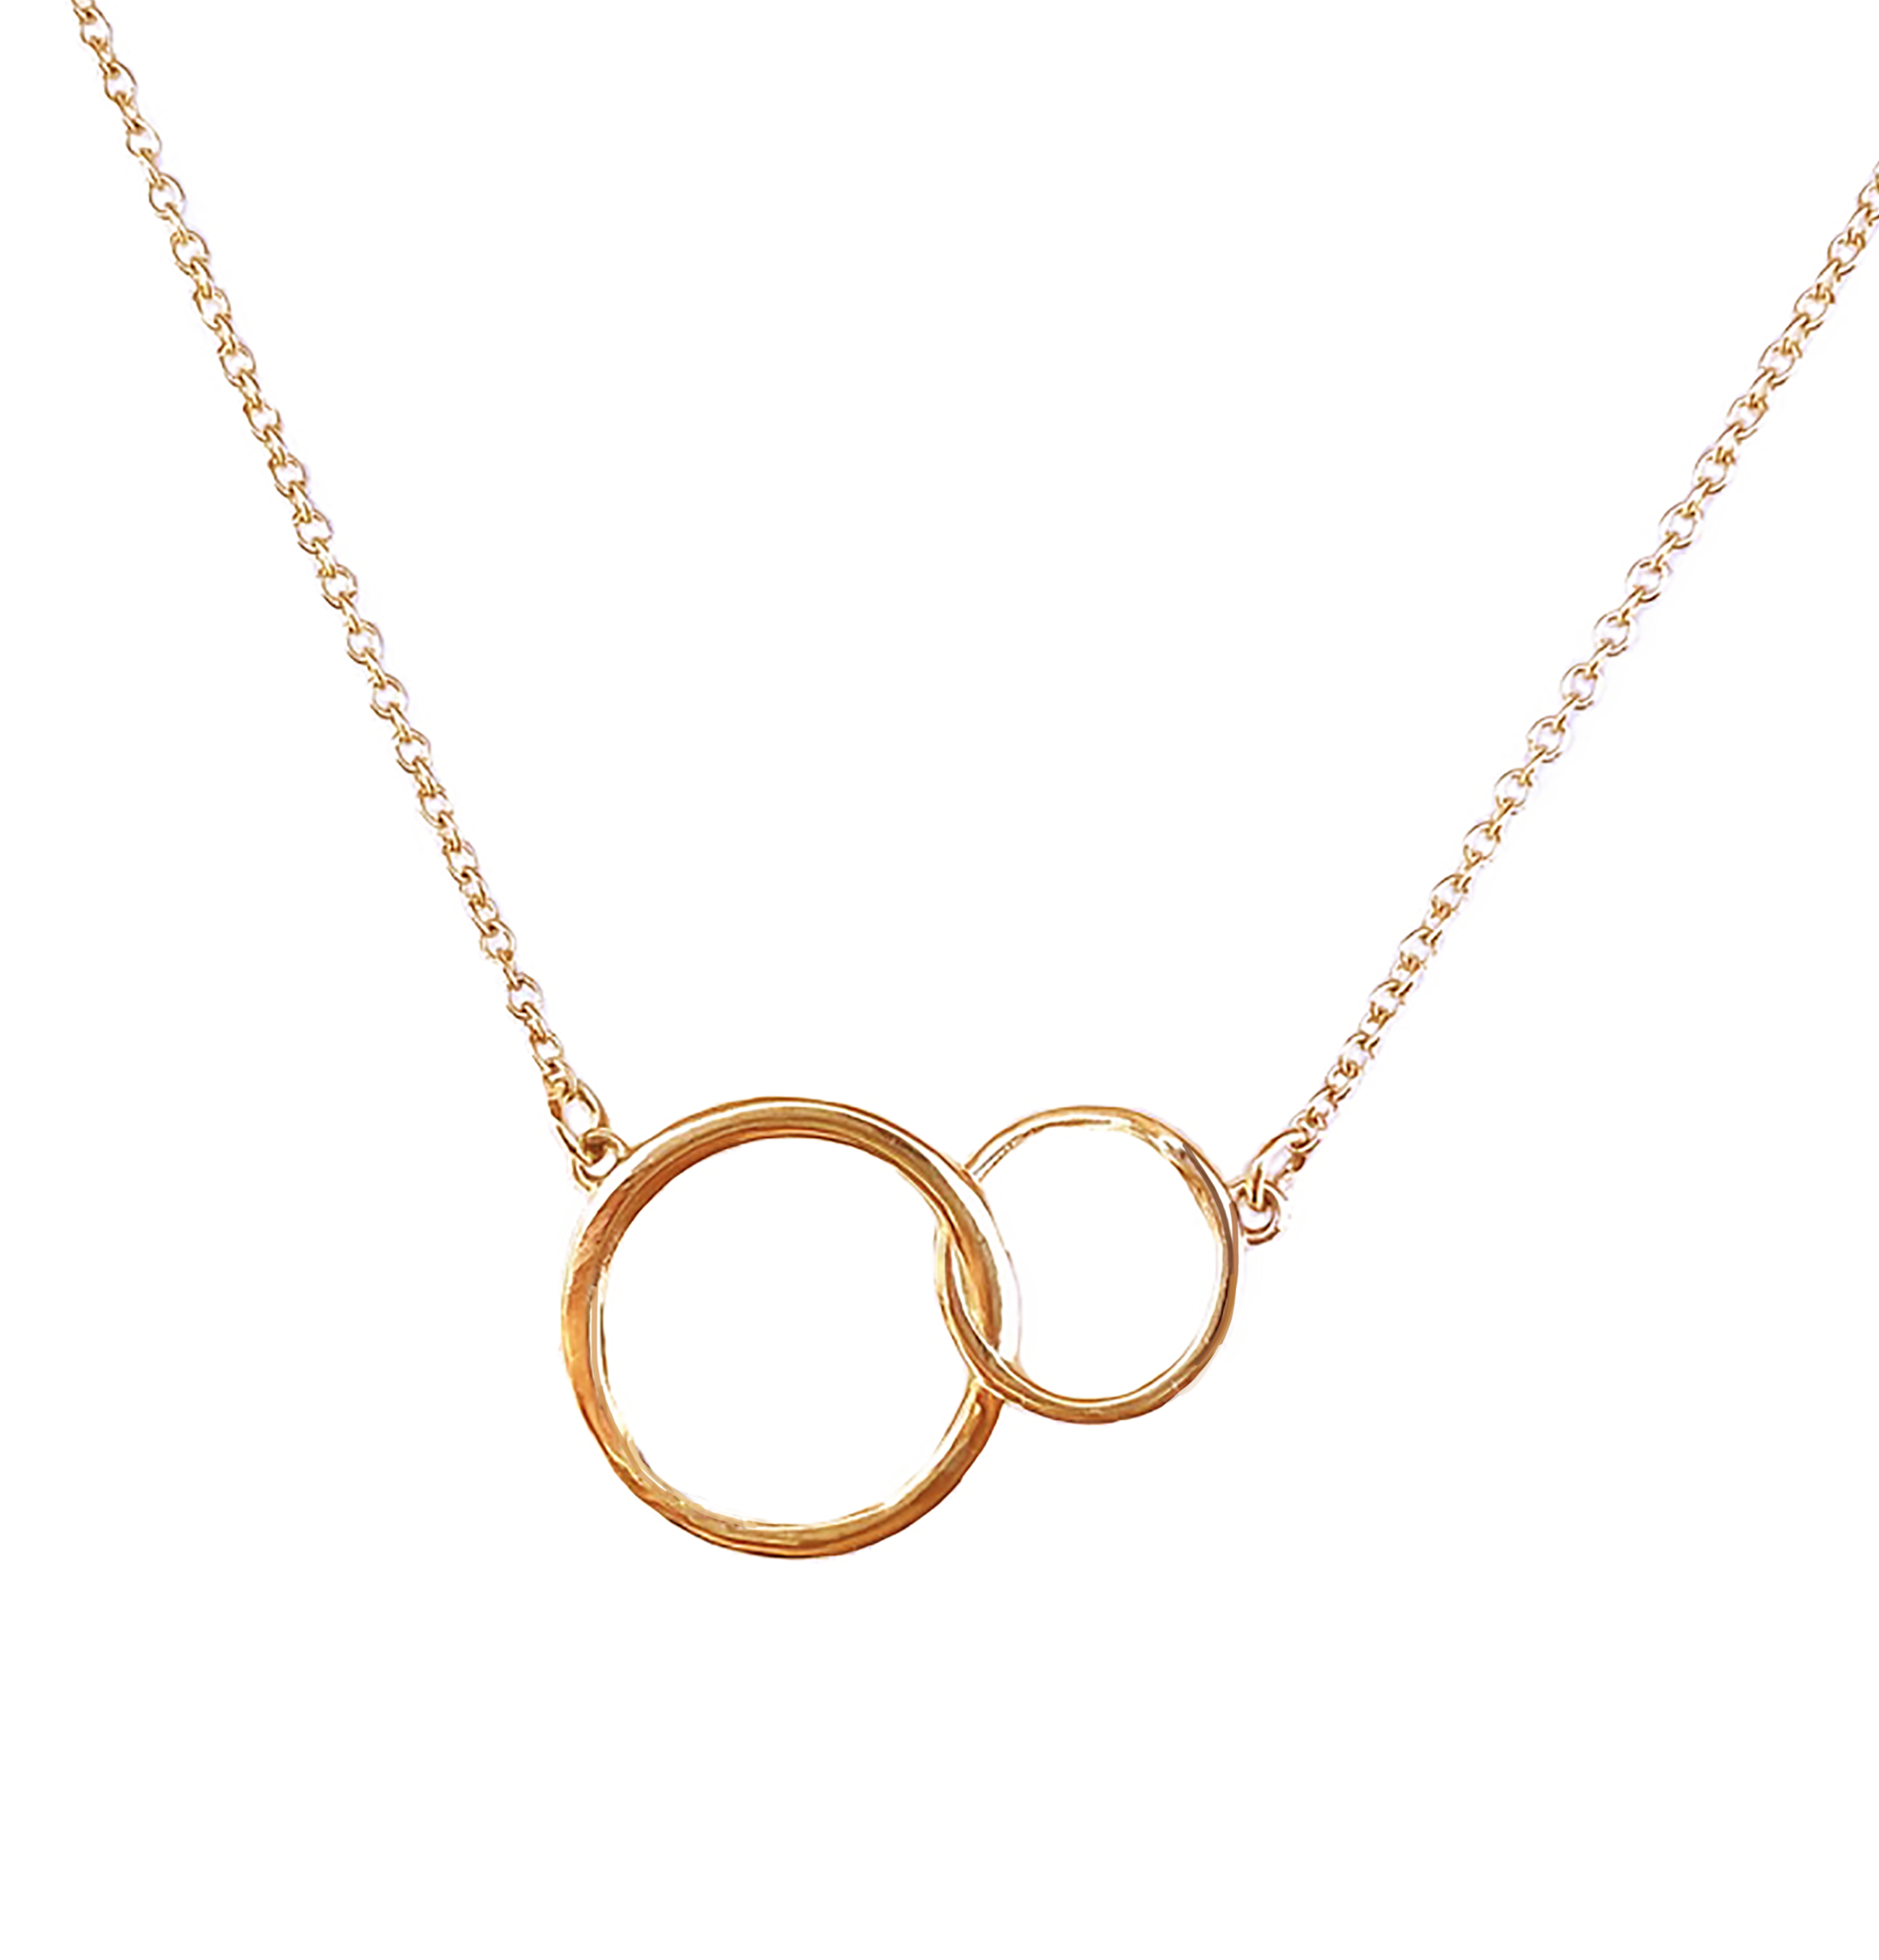 4 Circle Necklace Silver Gold Linked Circles Necklace Gift 4 Ring Necklace  Interlocking Rings Four Circles Entwined Circles - Etsy